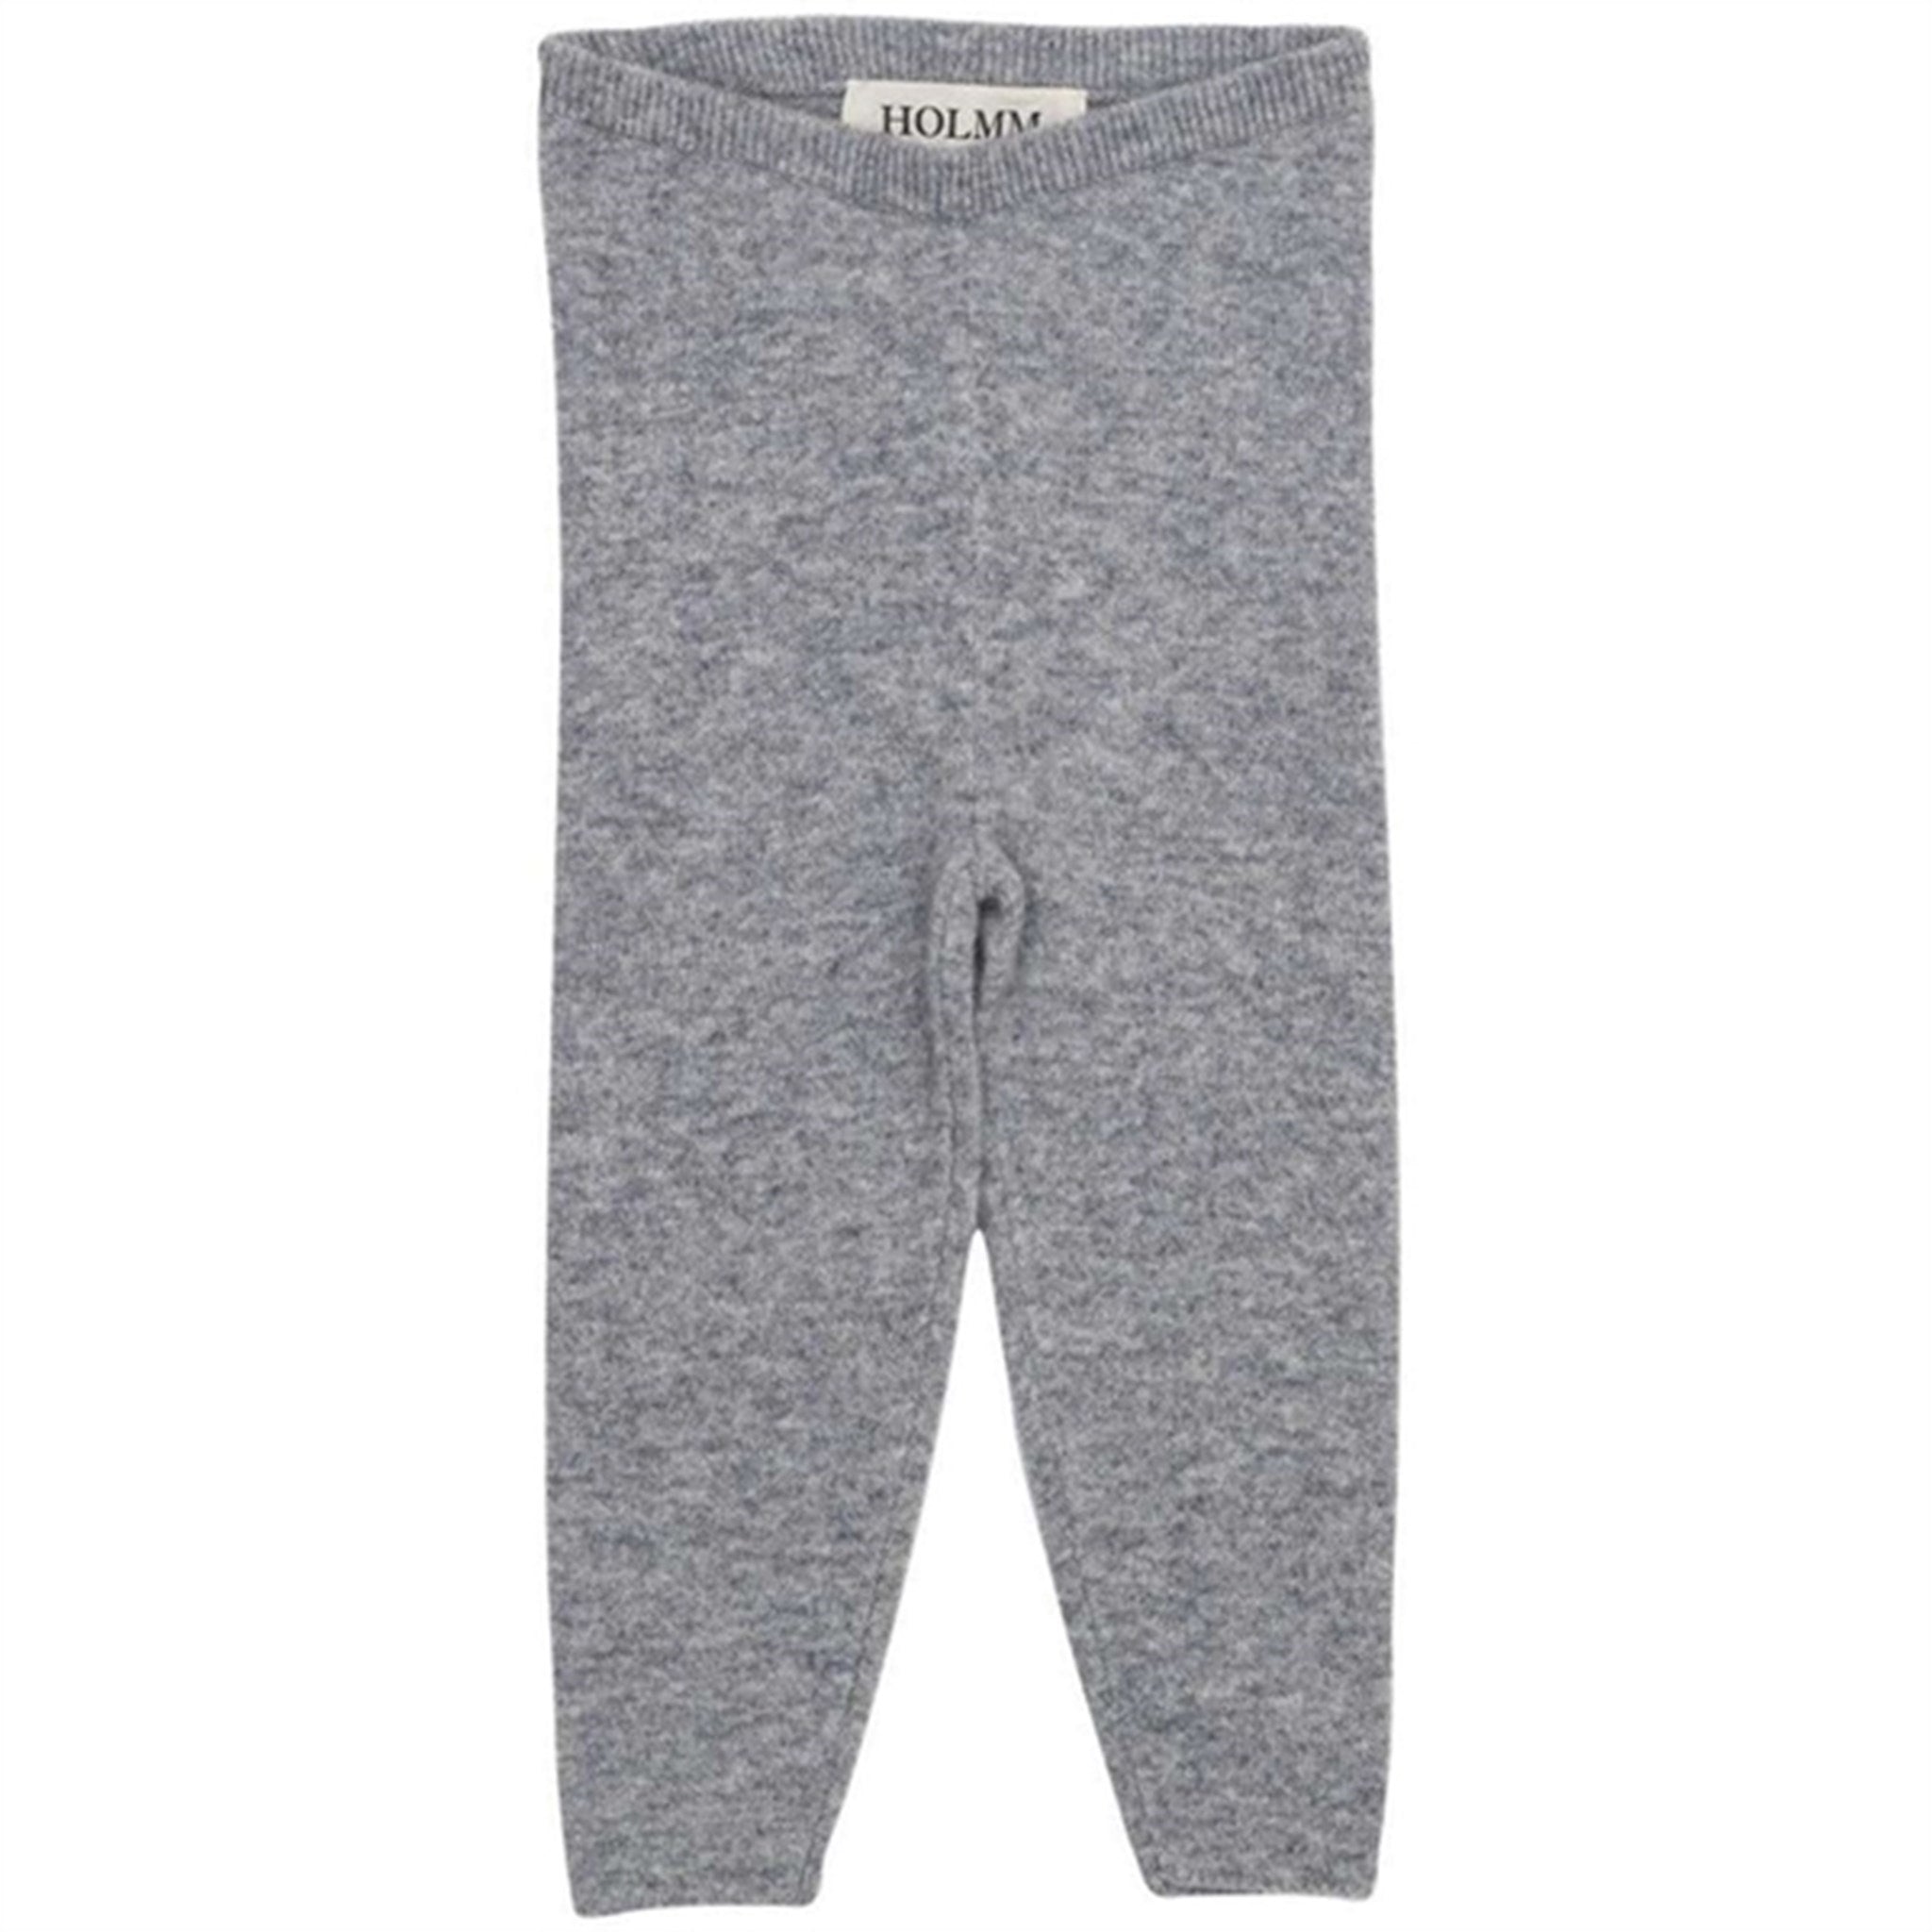 HOLMM Oxford Bailey Cashmere Knit Leggings